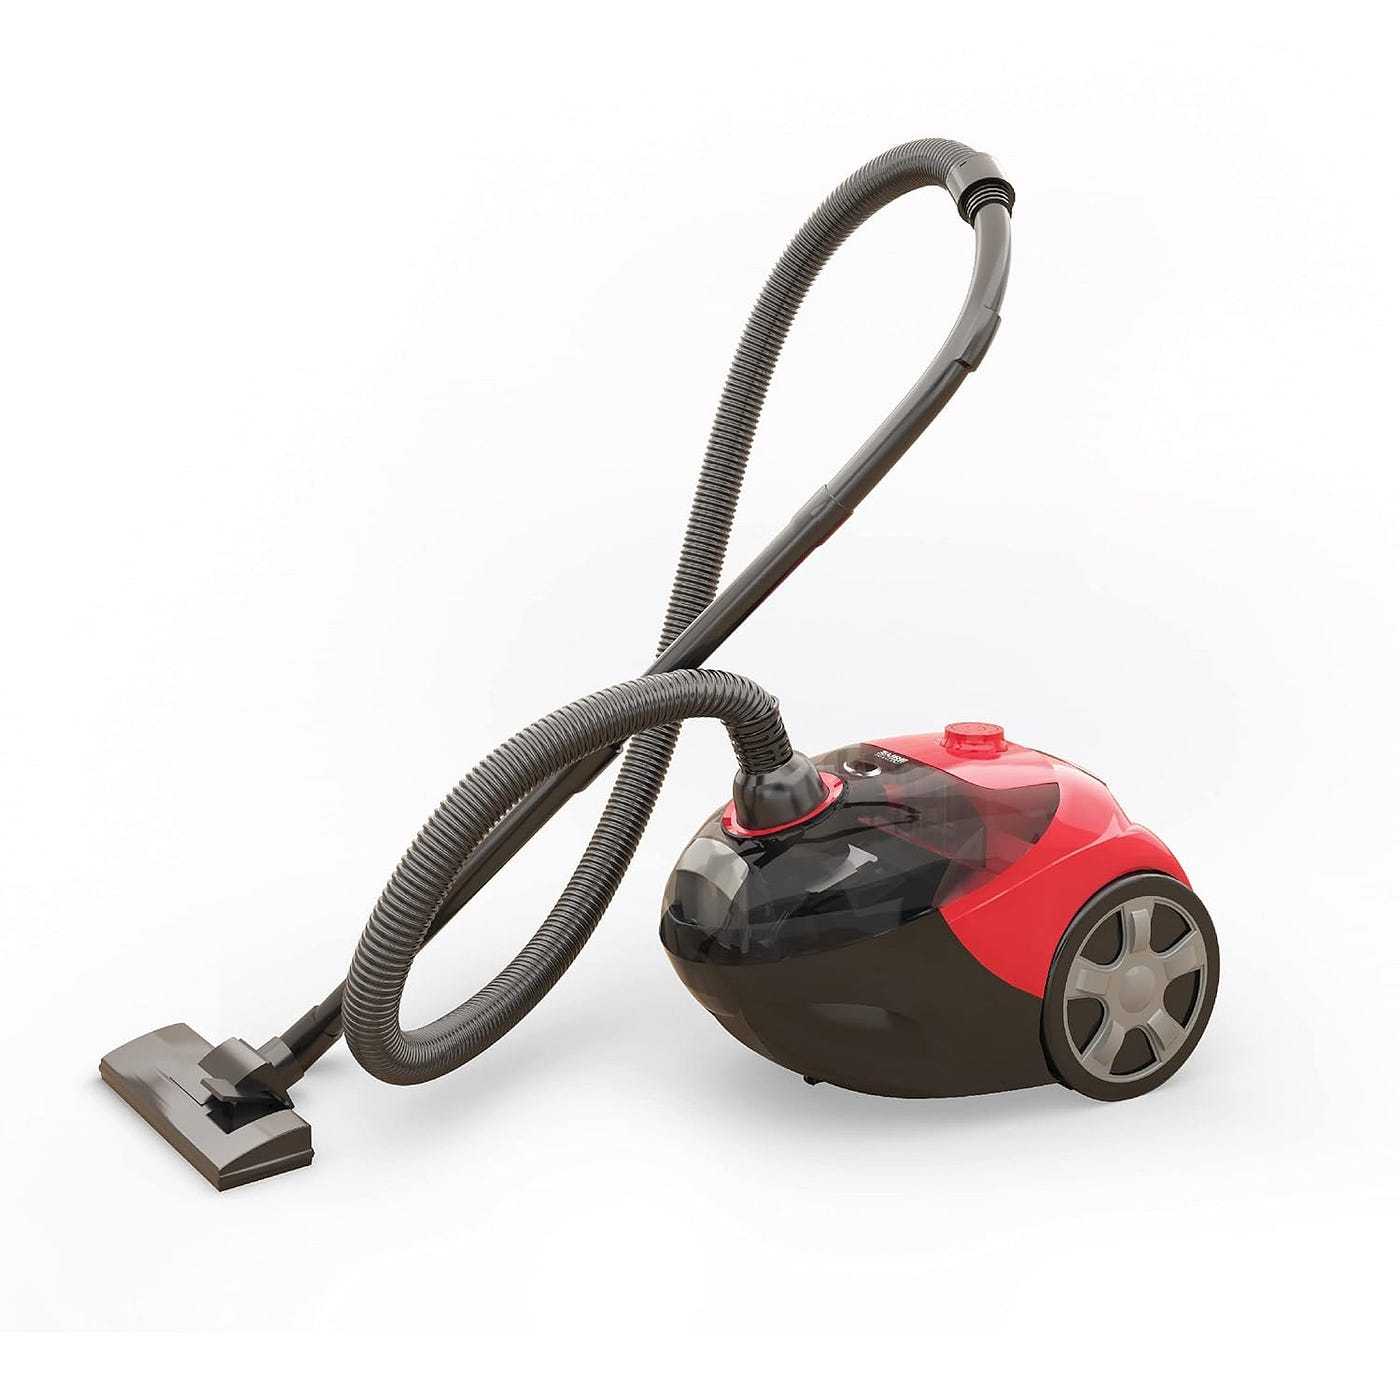 Vacuum cleaners: What they are, how they work, and why you need one -  Eureka Forbes